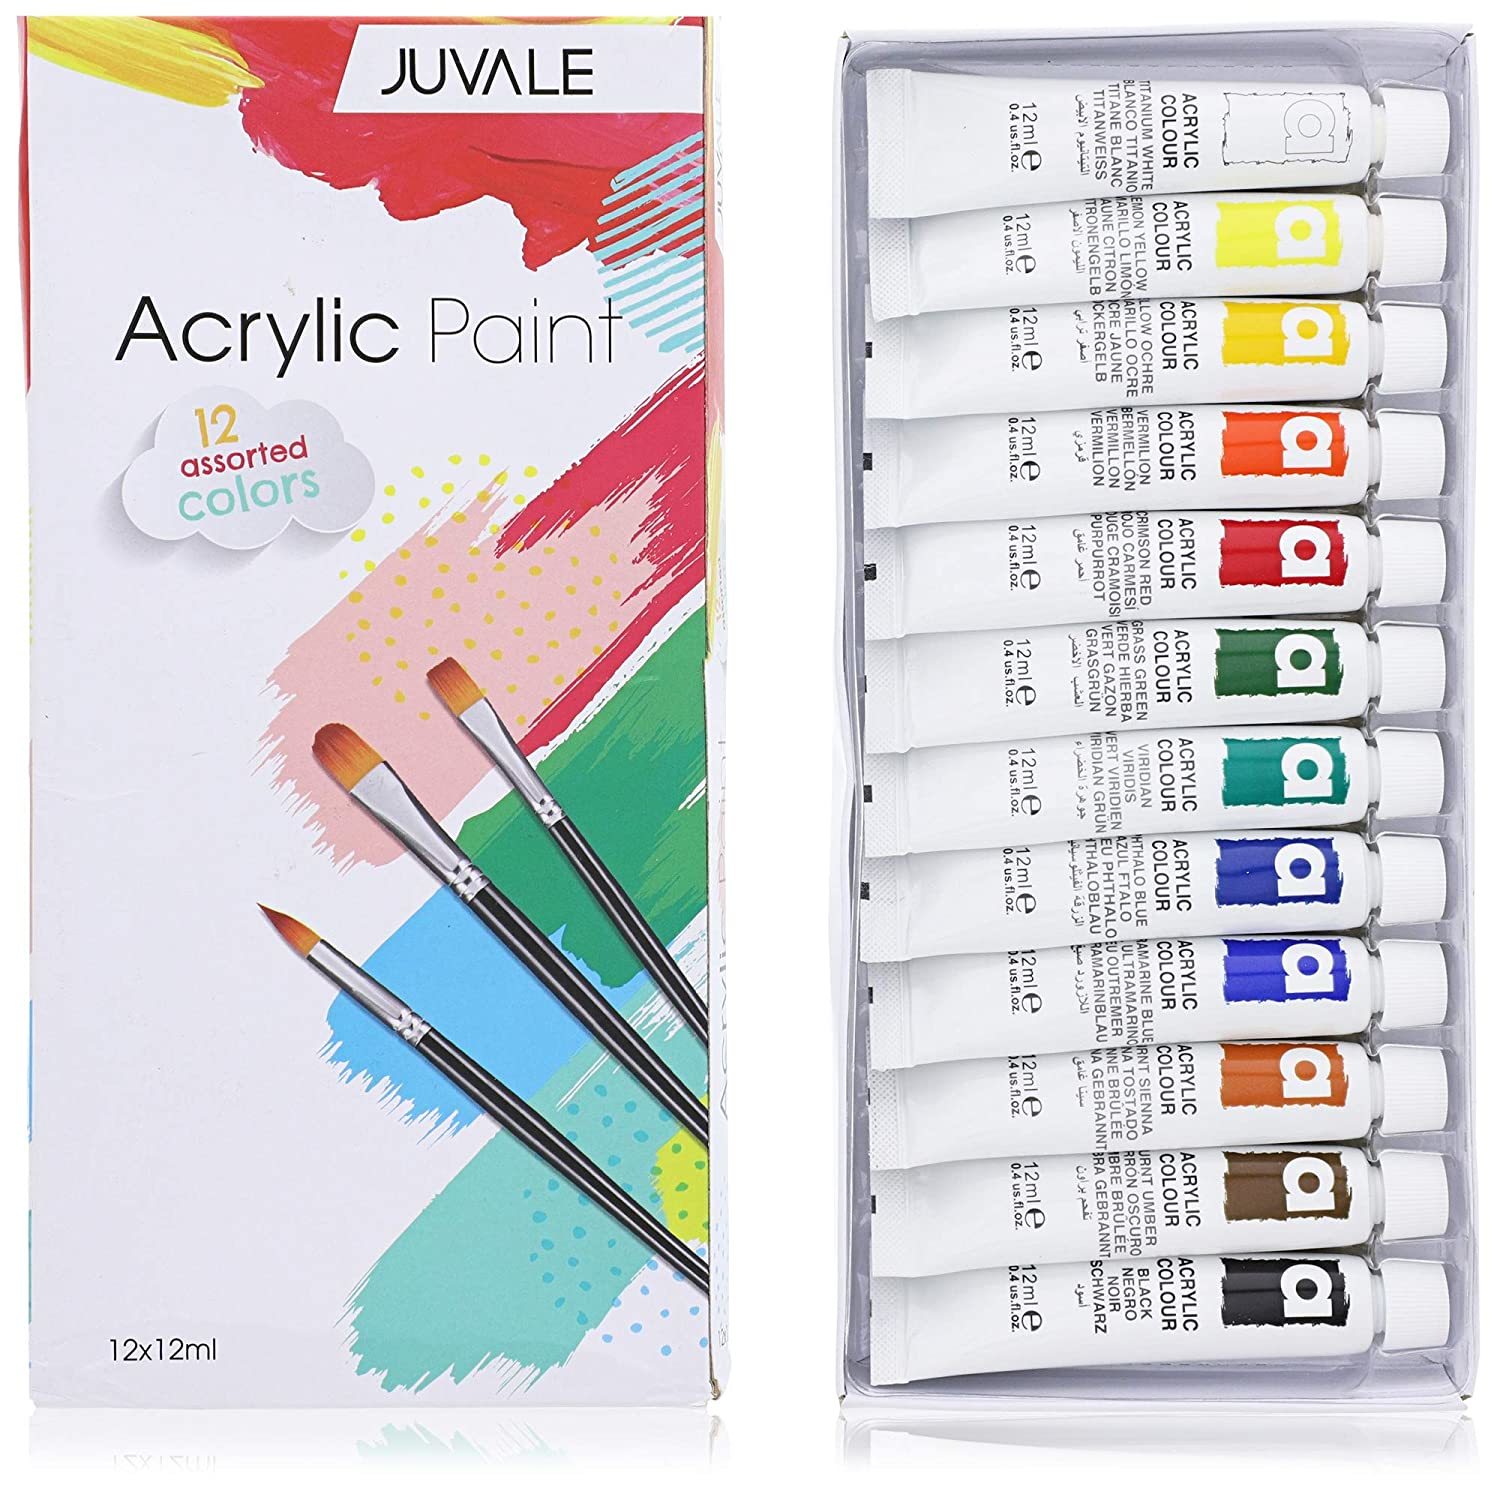 Acrylic Paint Set, Painting Party Supplies (12 X 12 Ml, 12 Pack)..